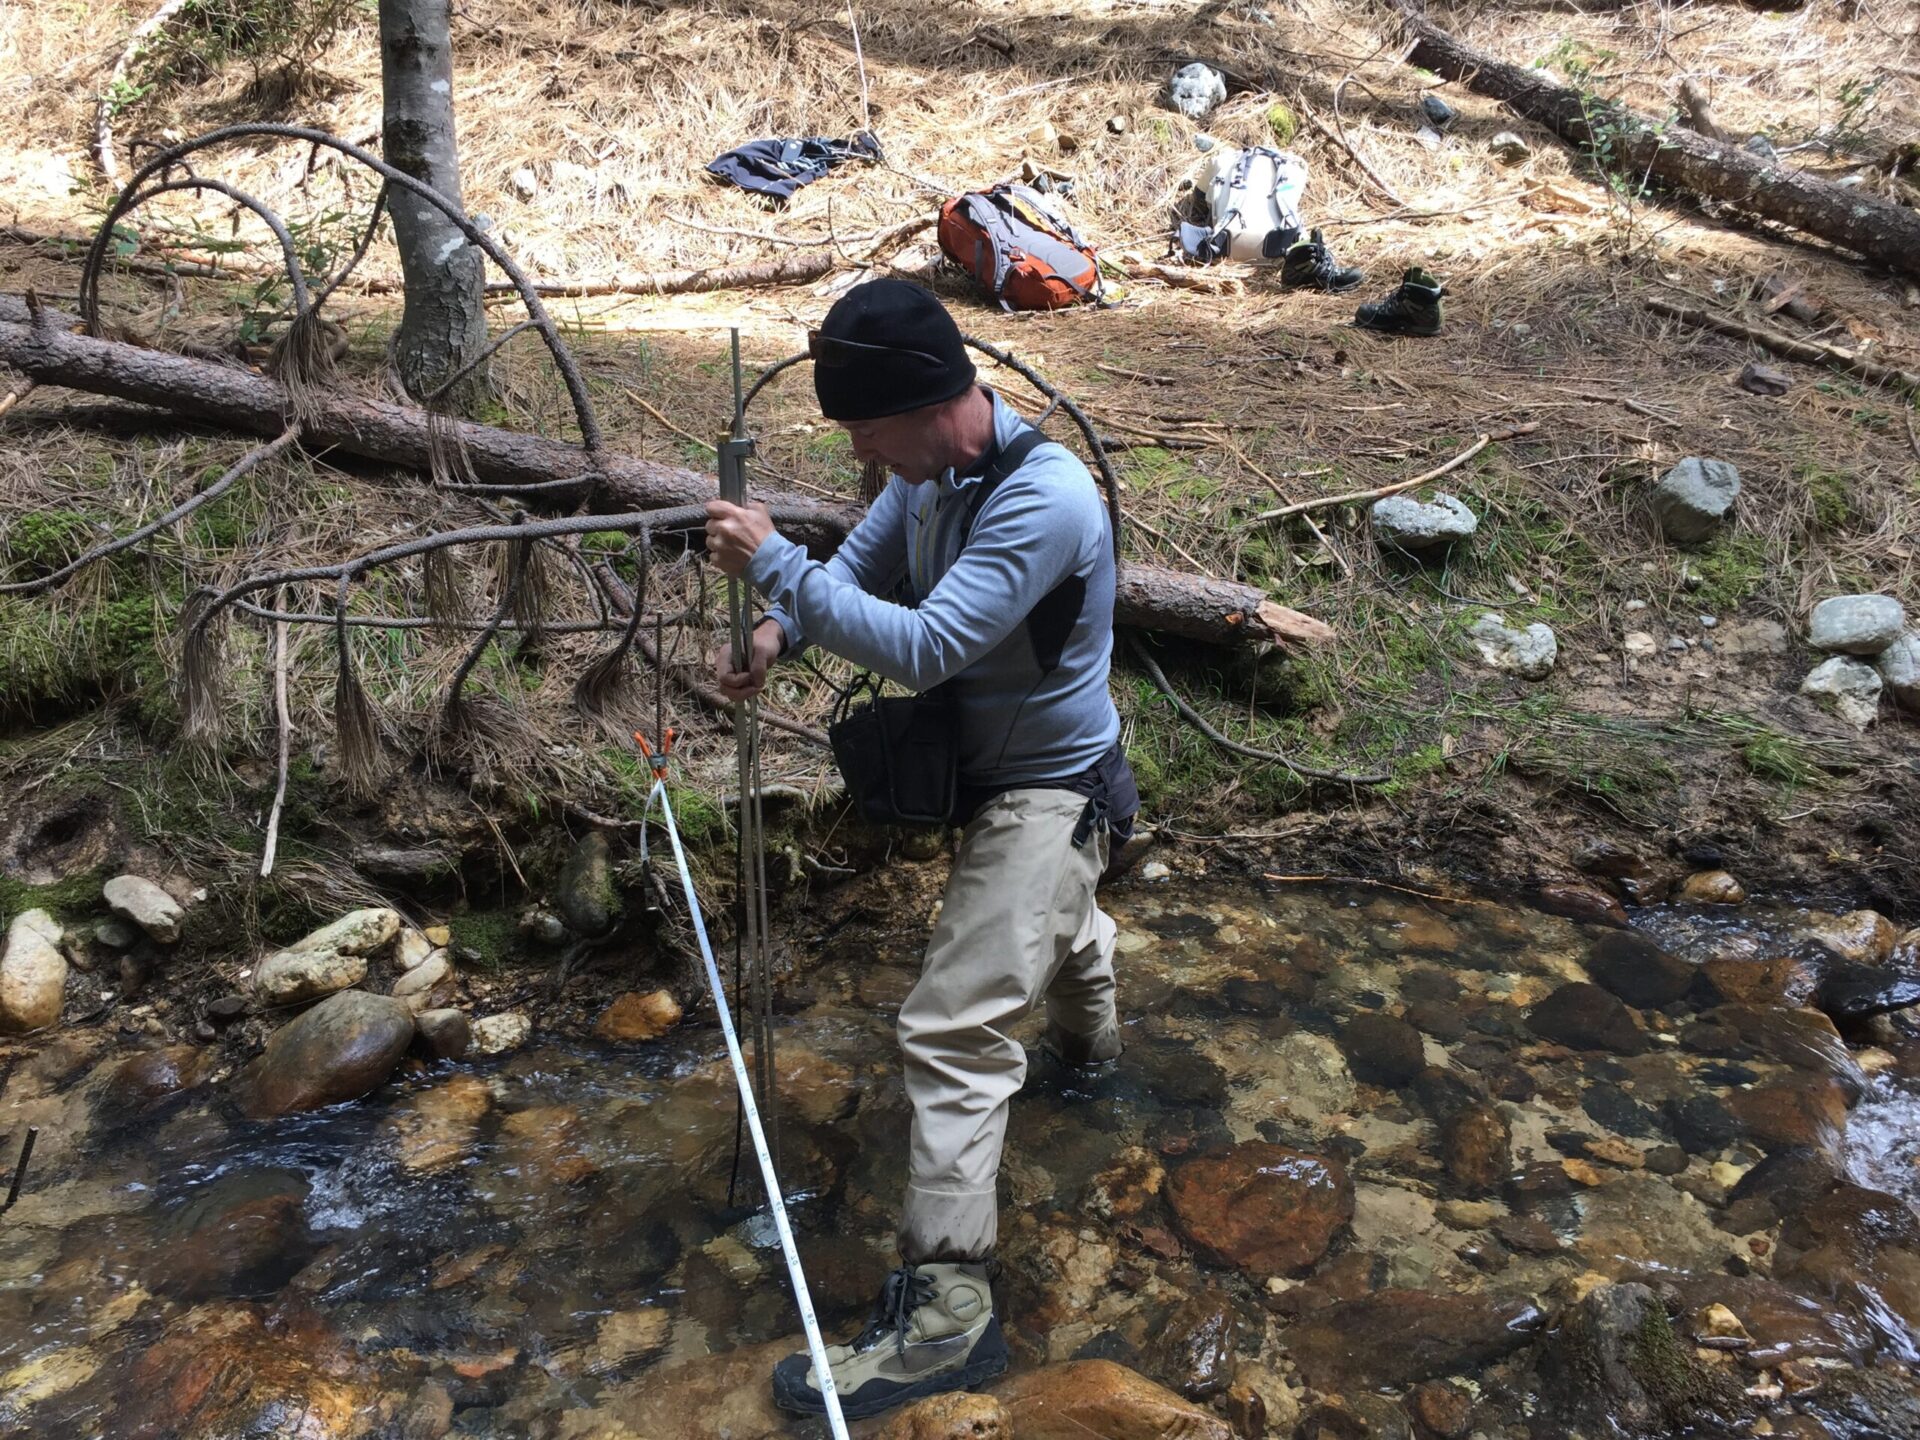 Brennan Johnston measuring stream flow to assist in SYRCL’s mine studies. Join the River First Responders Team to help with this effort!